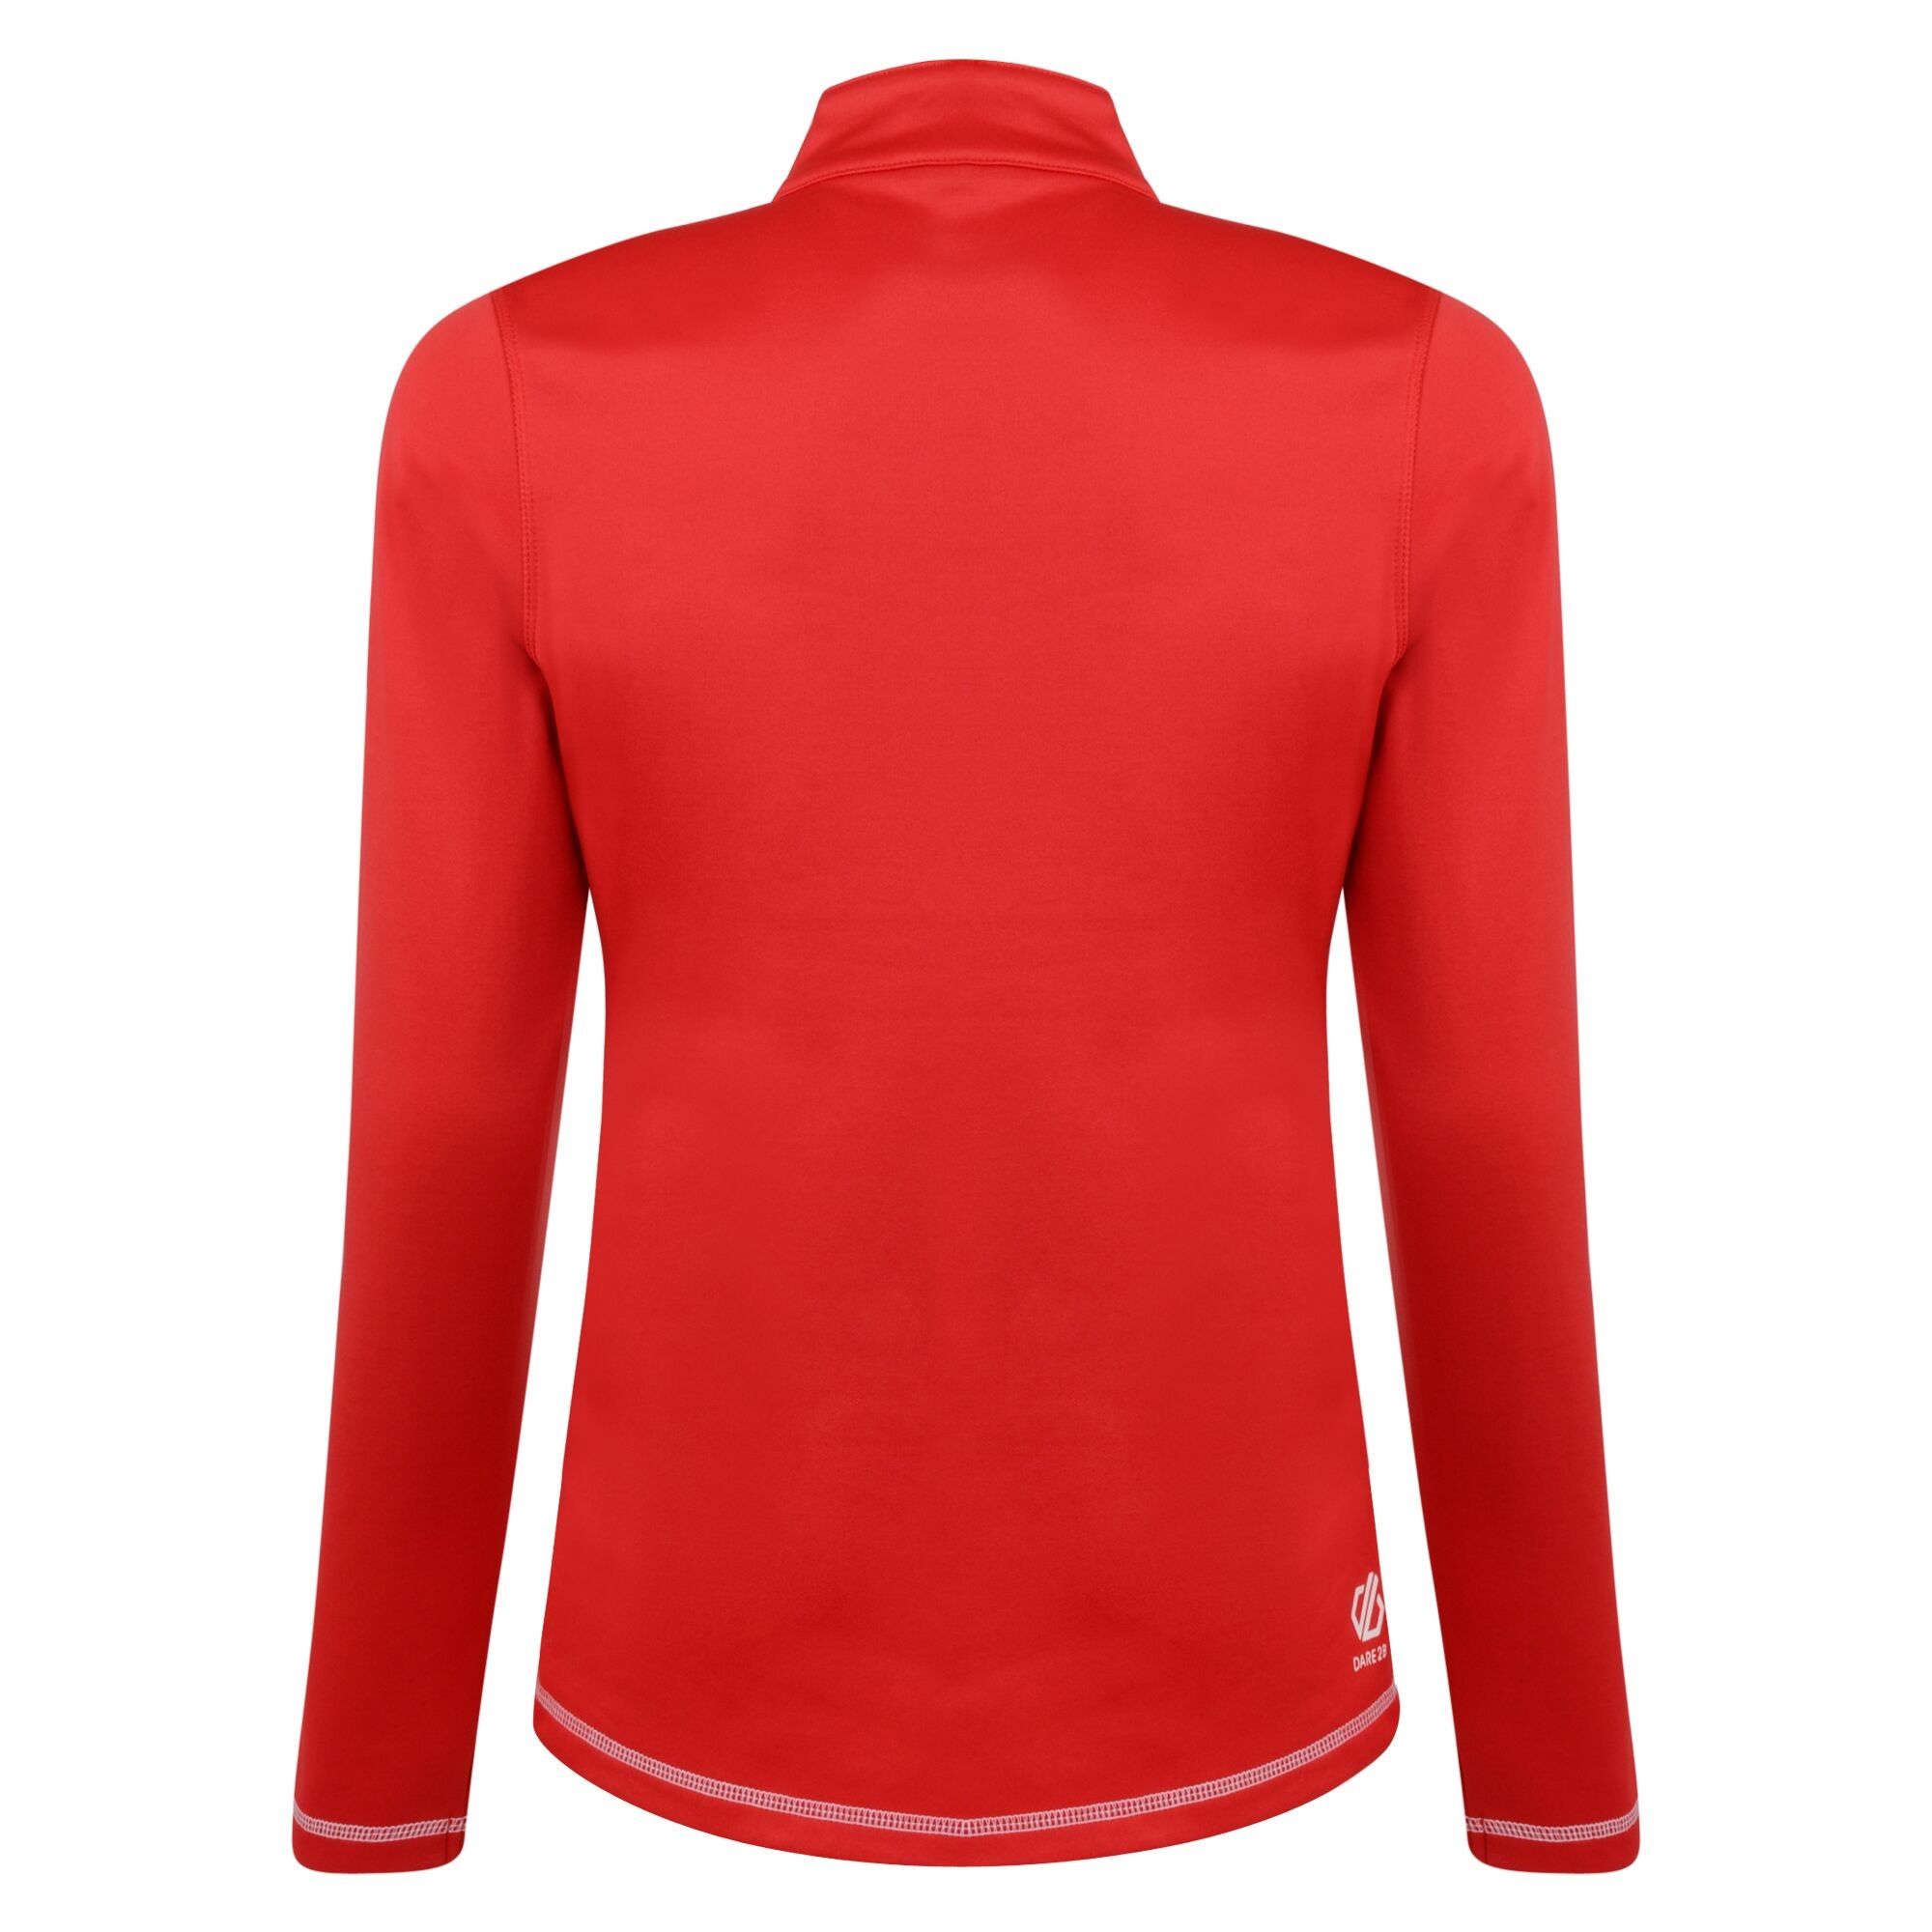 90% polyester, 10% elastane. Ilus Core warm backed knitted stretch fabric. Quick drying. Half length zip with inner zip and chin guard.